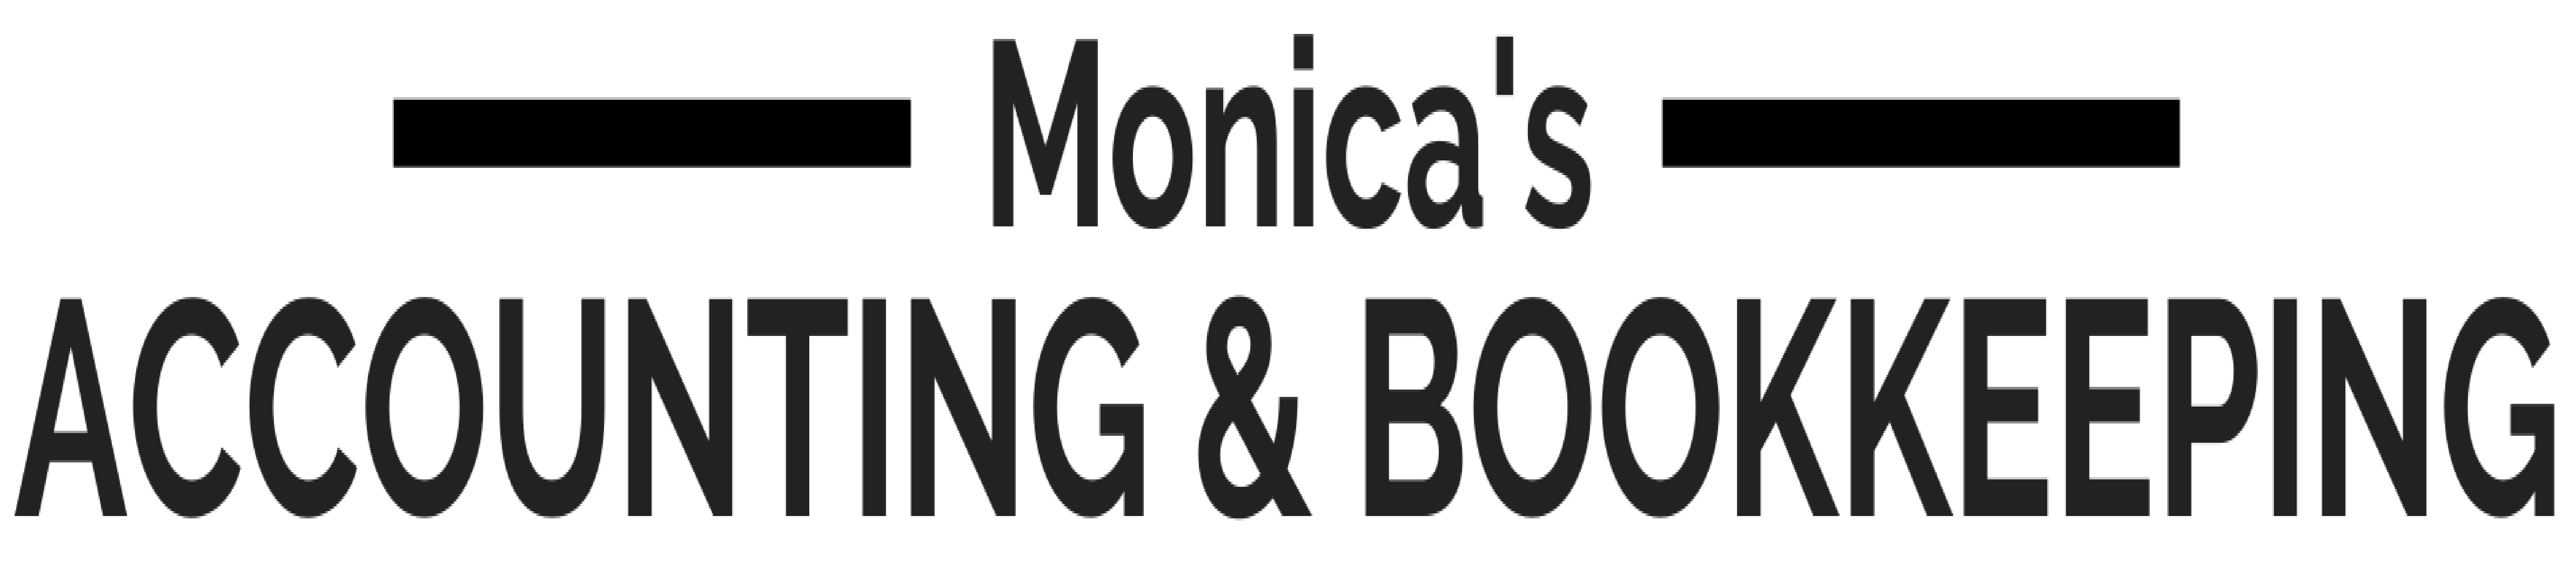 Monica's Accounting & Bookkeeping Services